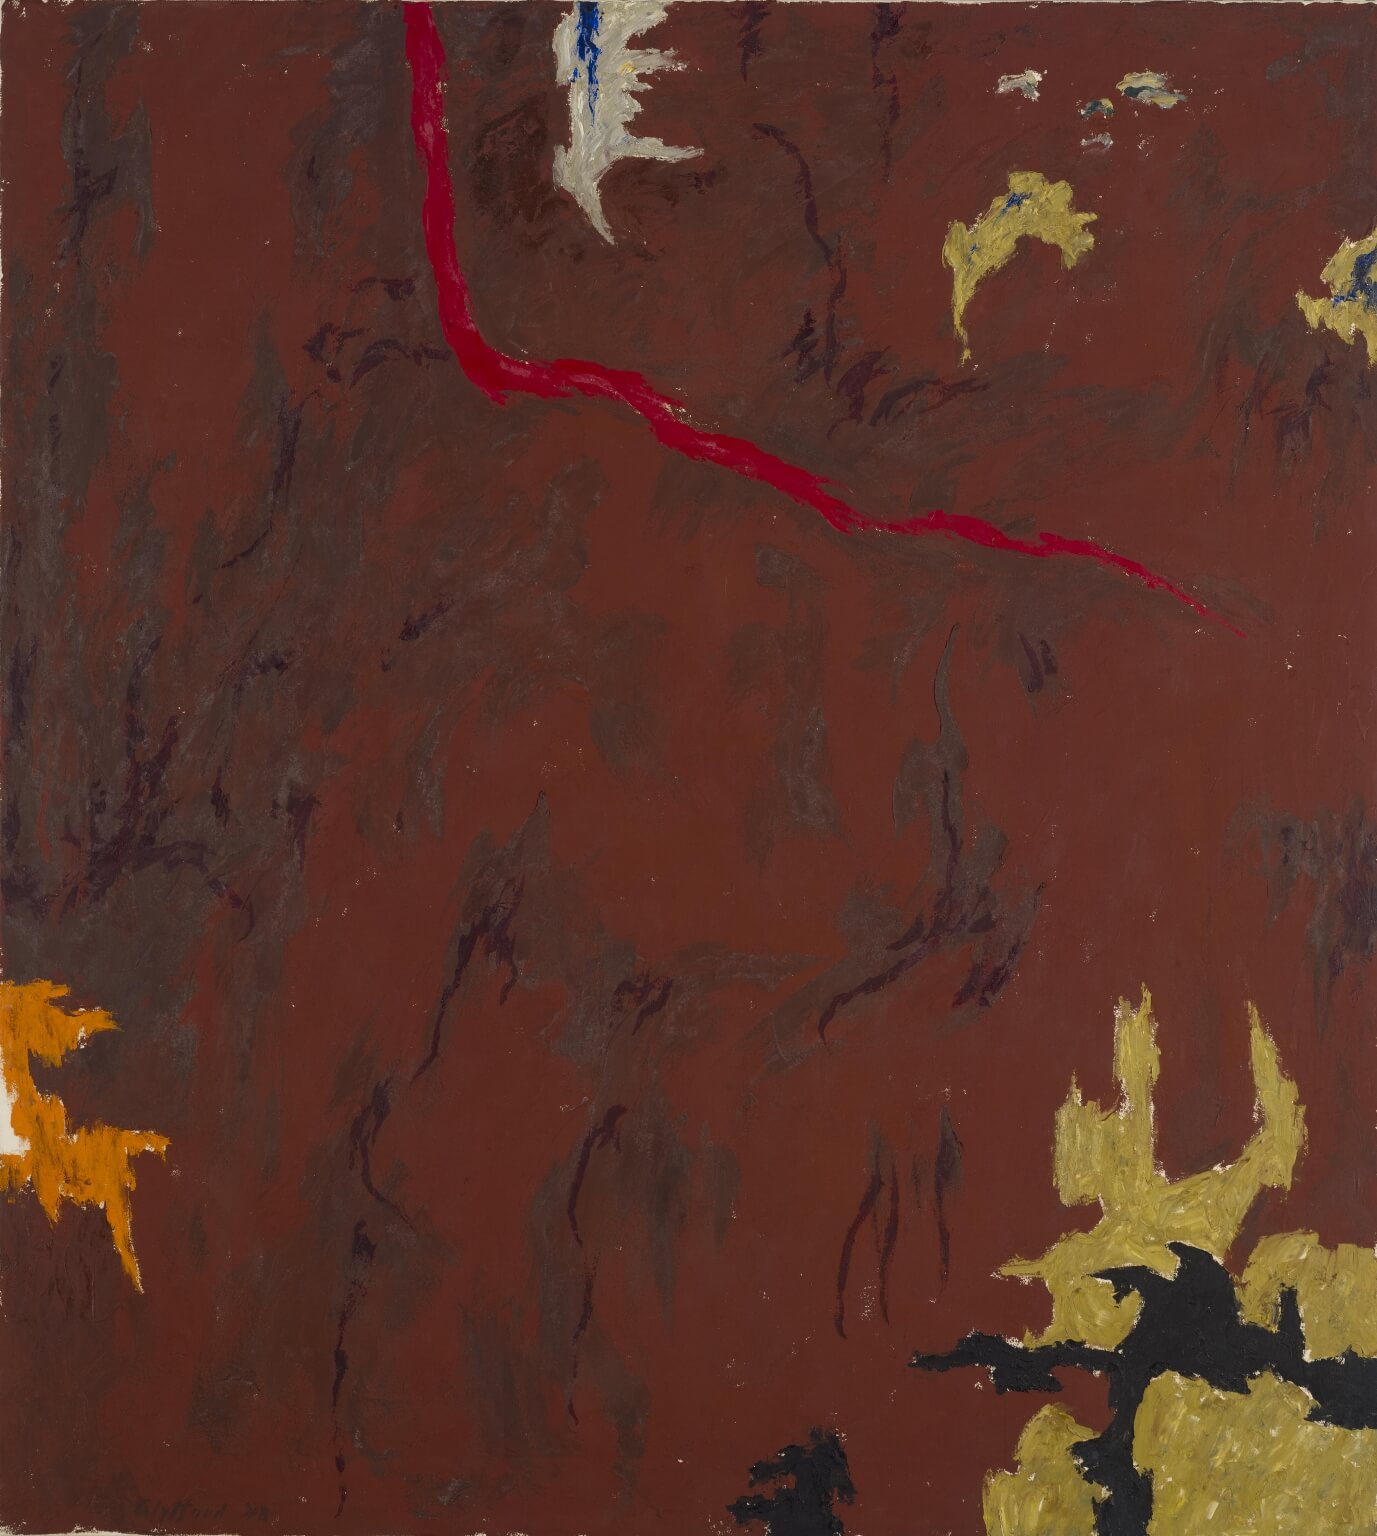 Closeup of an abstract painting by Clyfford Still with reddish brown paint and splashes of orange, gold, and black